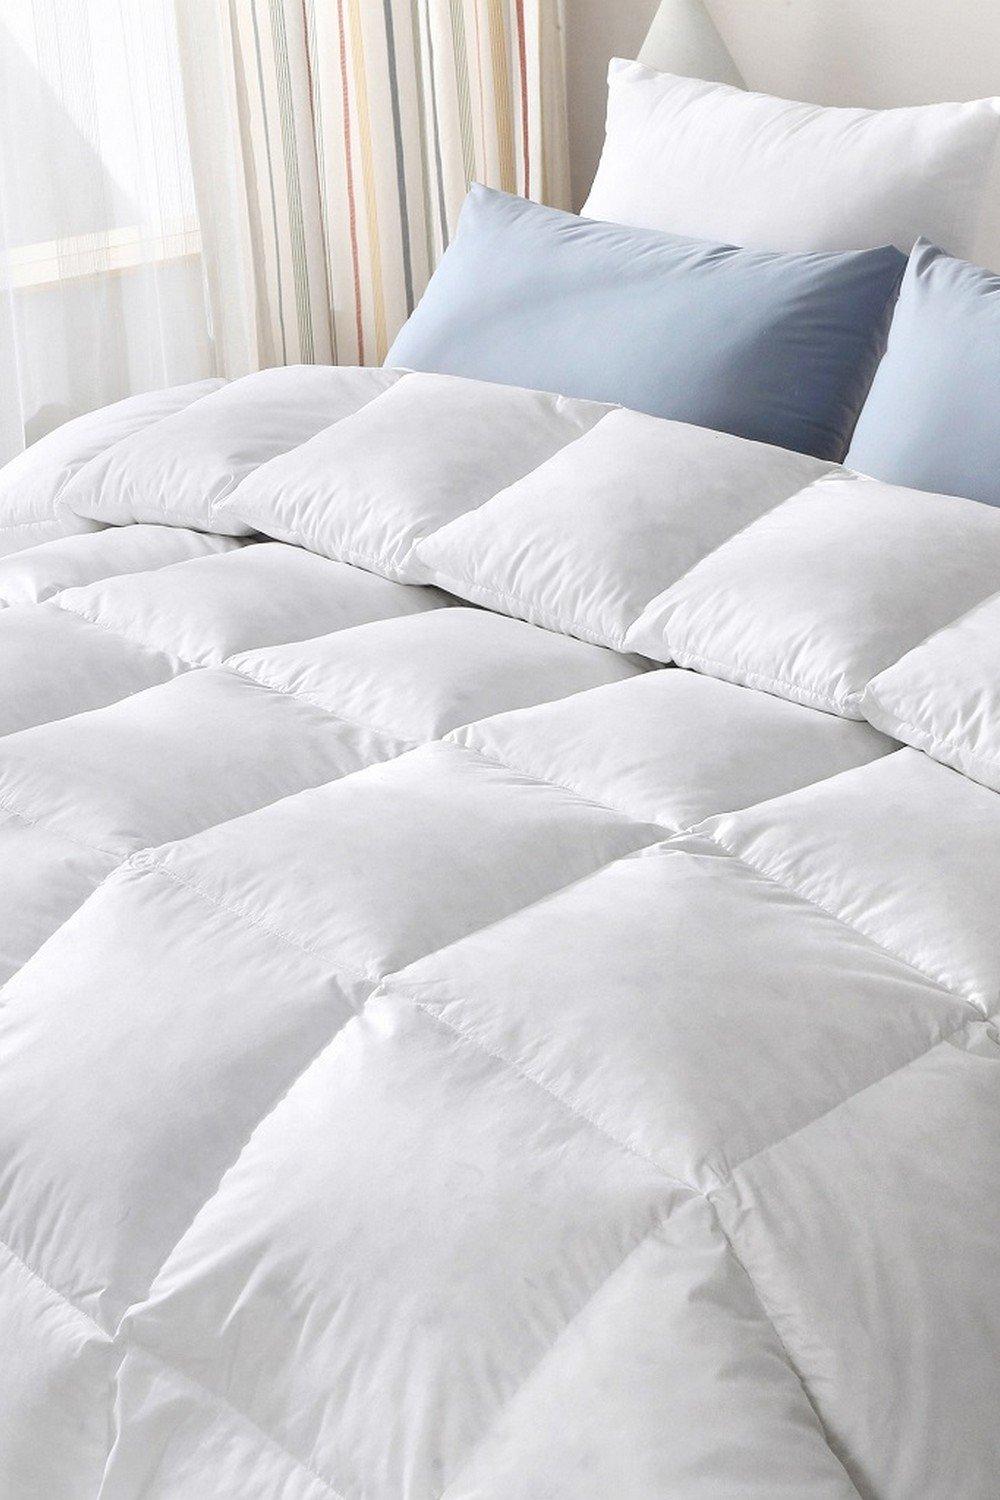 Duck Feather And Down Duvet Quilt Hotel Quality 13.5 tog Winter